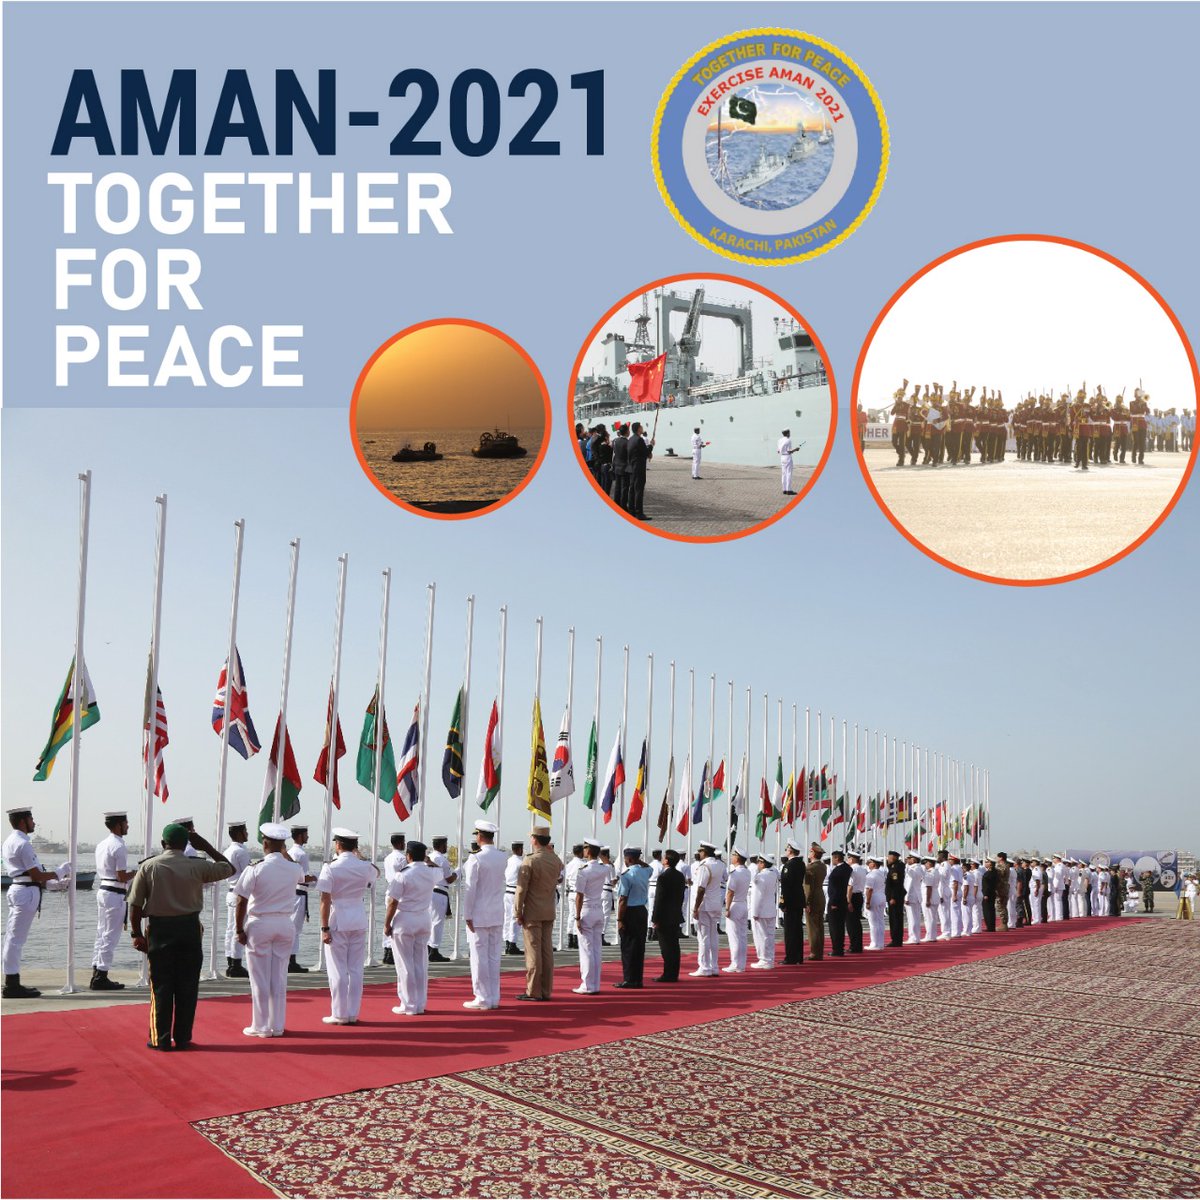 PakNavy exercise AMAN2021 makes sure participation of more than 40 countries. Pak Navy initiative of these exercises will definitely have massive diplomatic, economic  impacts on Pakistan
@TeamISPofficial
#PakNavyAMANExercise